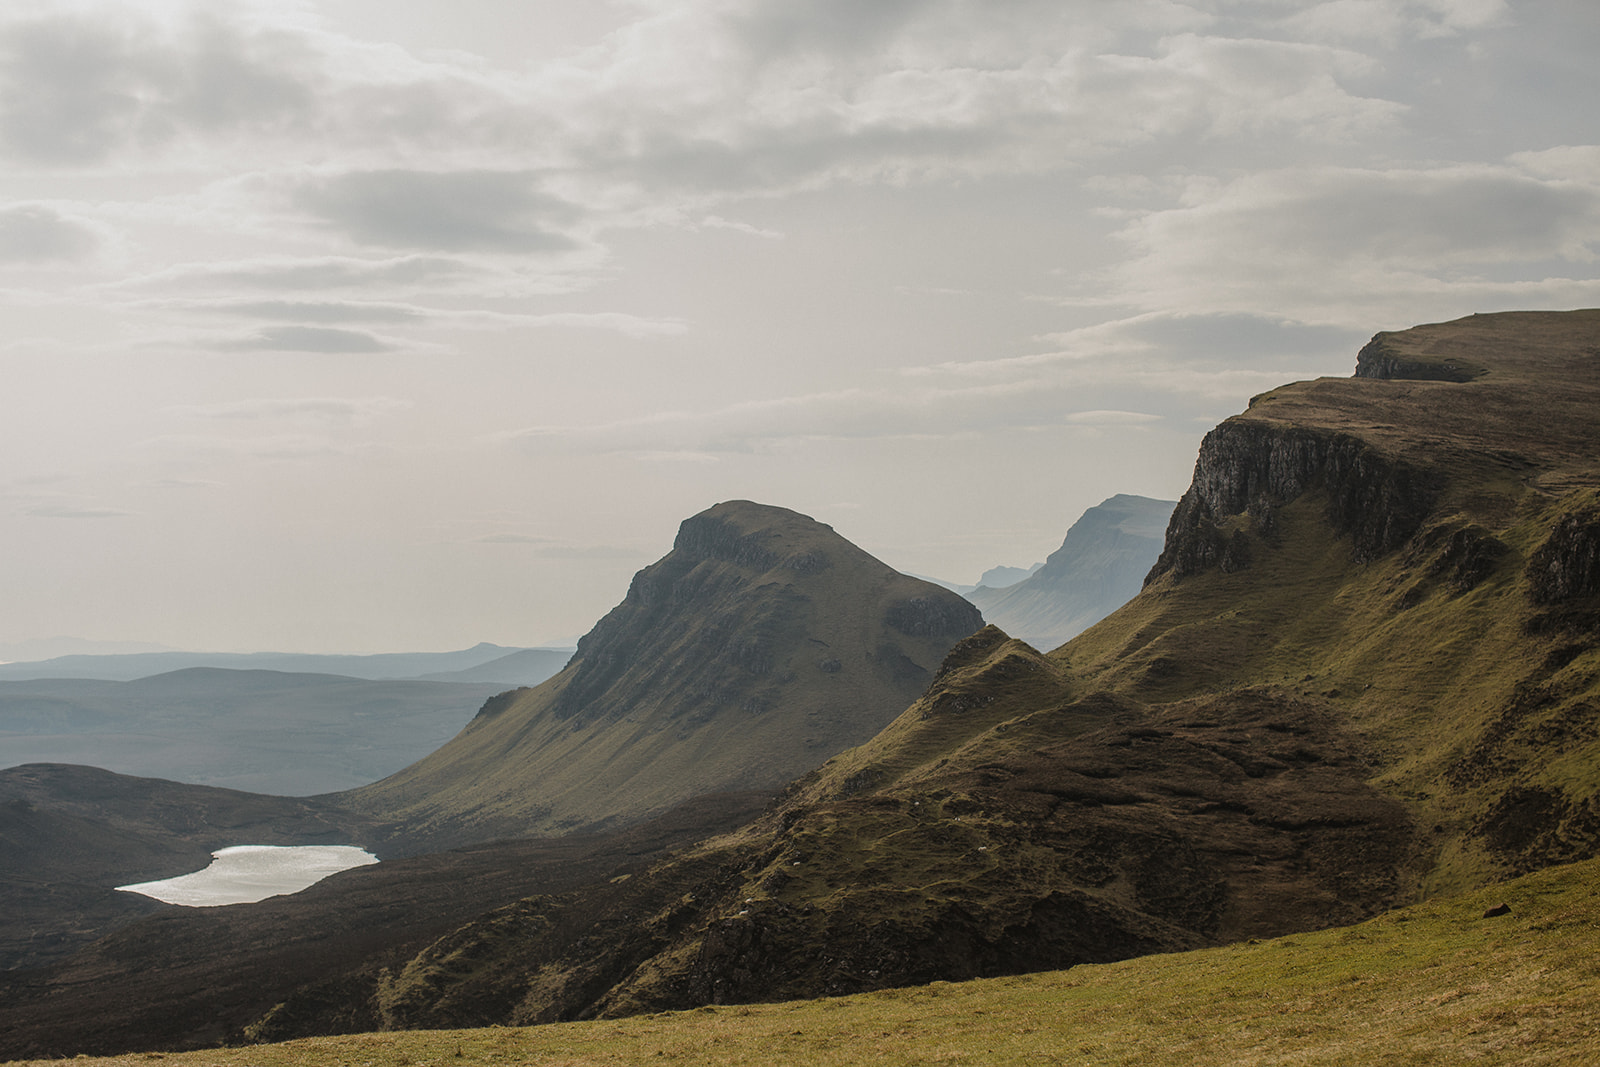 Views from the top of The Quirang on Isle of Skye, Scotland.